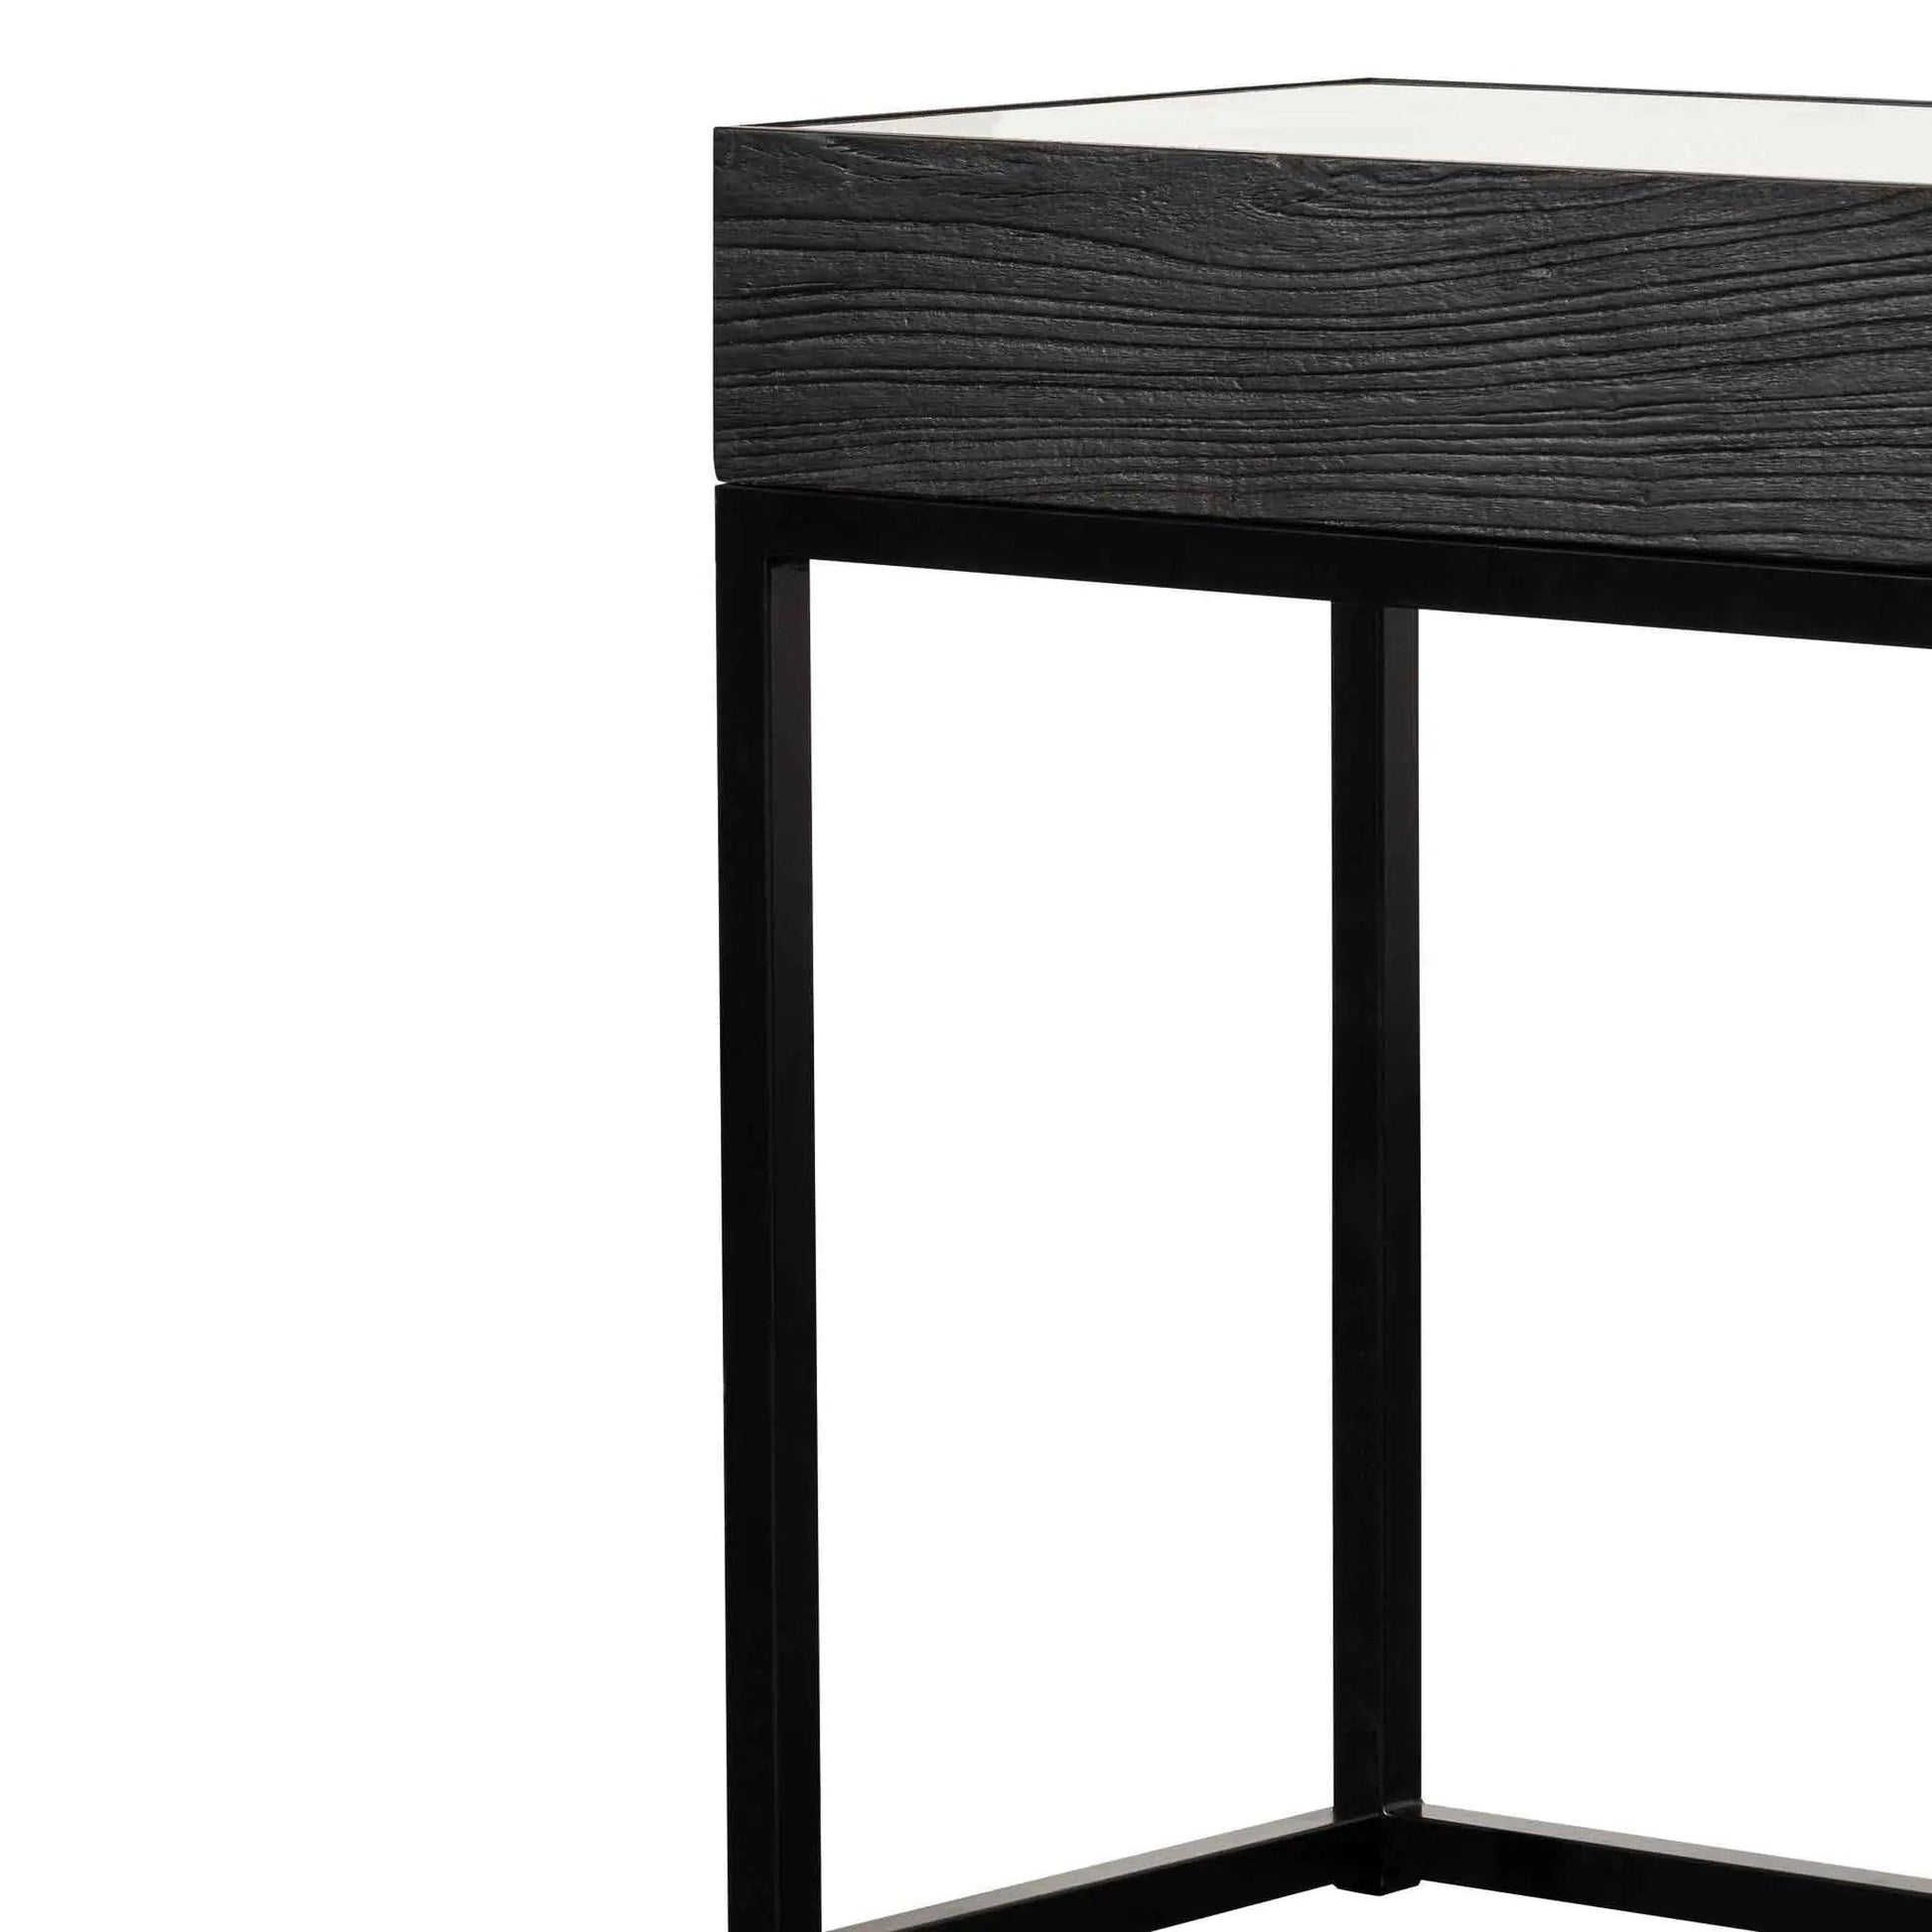 Calibre 1.39m Reclaimed Console Table - Full Black DT6307-NI - Console TablesDT6307-NI 3